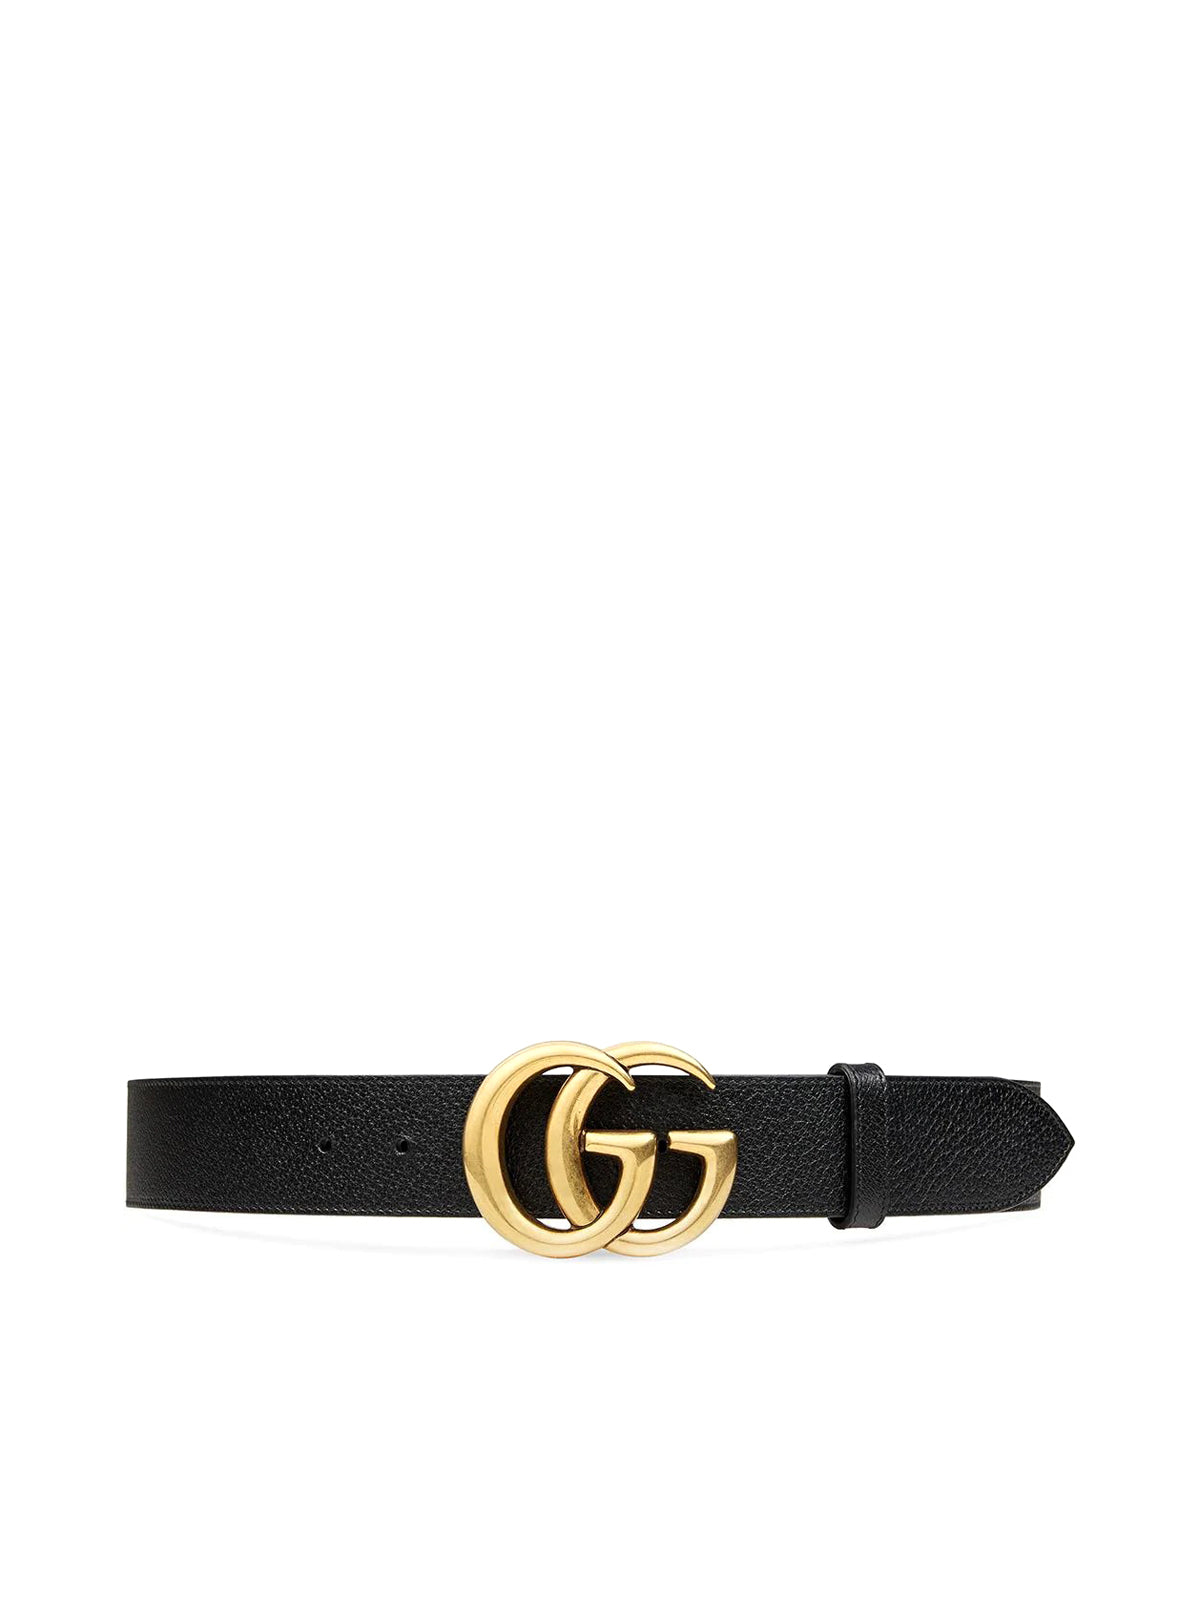 LEATHER BELT WITH GG BUCKLE 4 CM